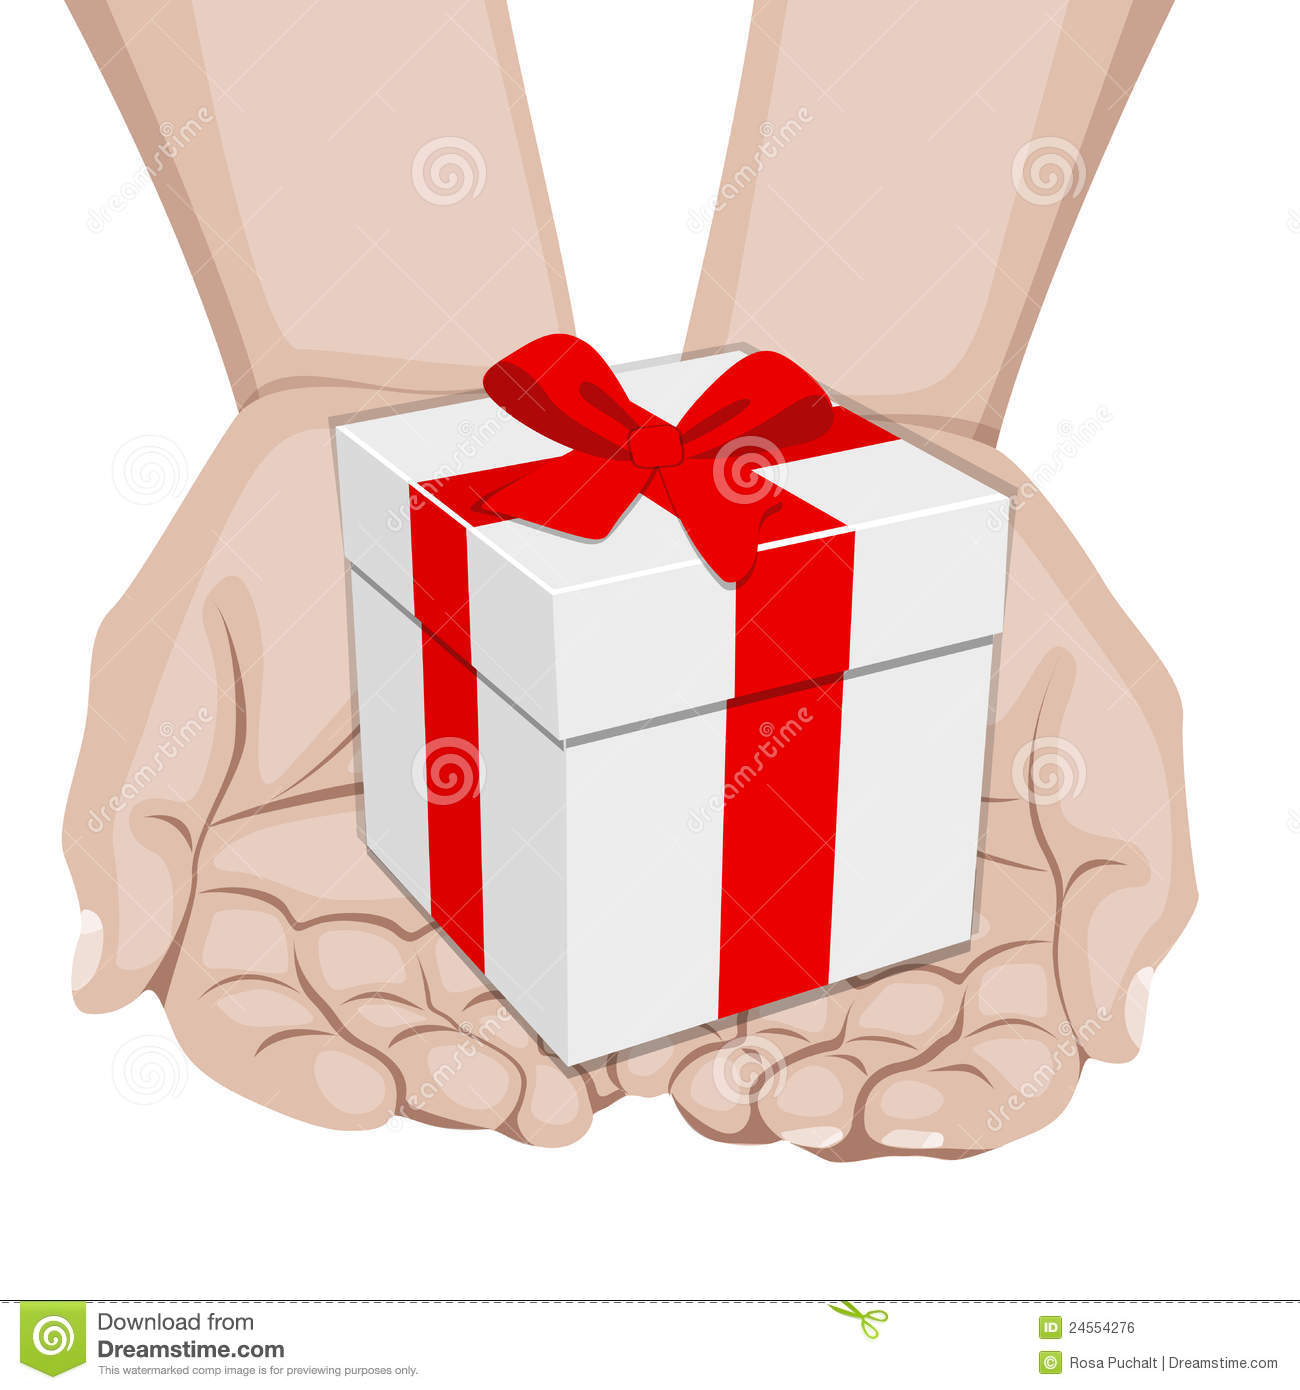 Hands Offering A Gift Royalty Free Stock Image   Image  24554276